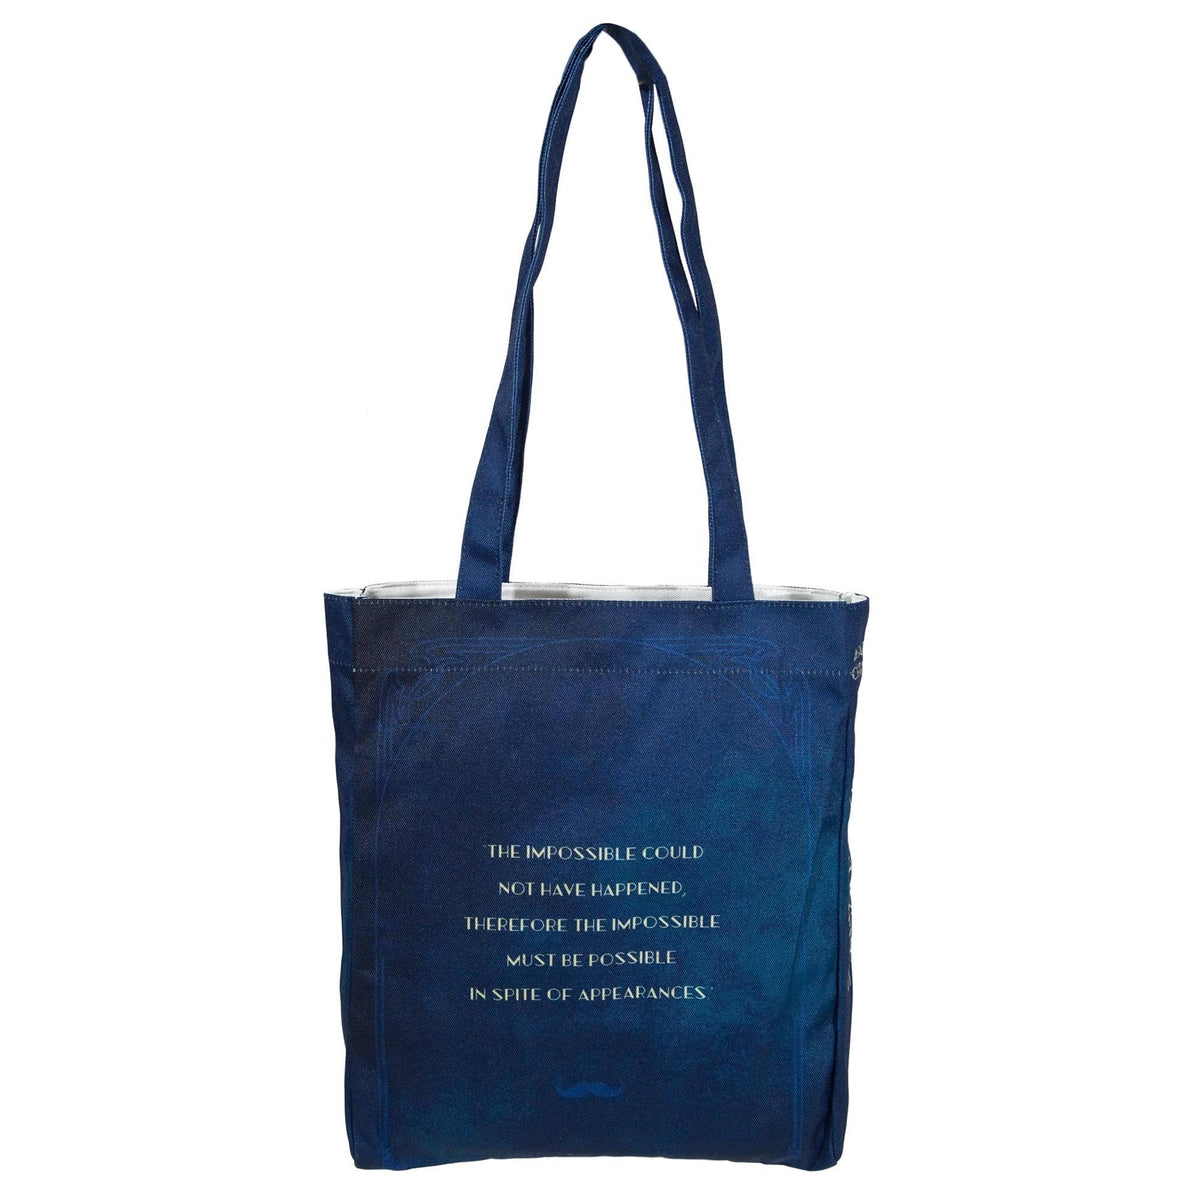 Murder on The Orient Express Book Tote Bag